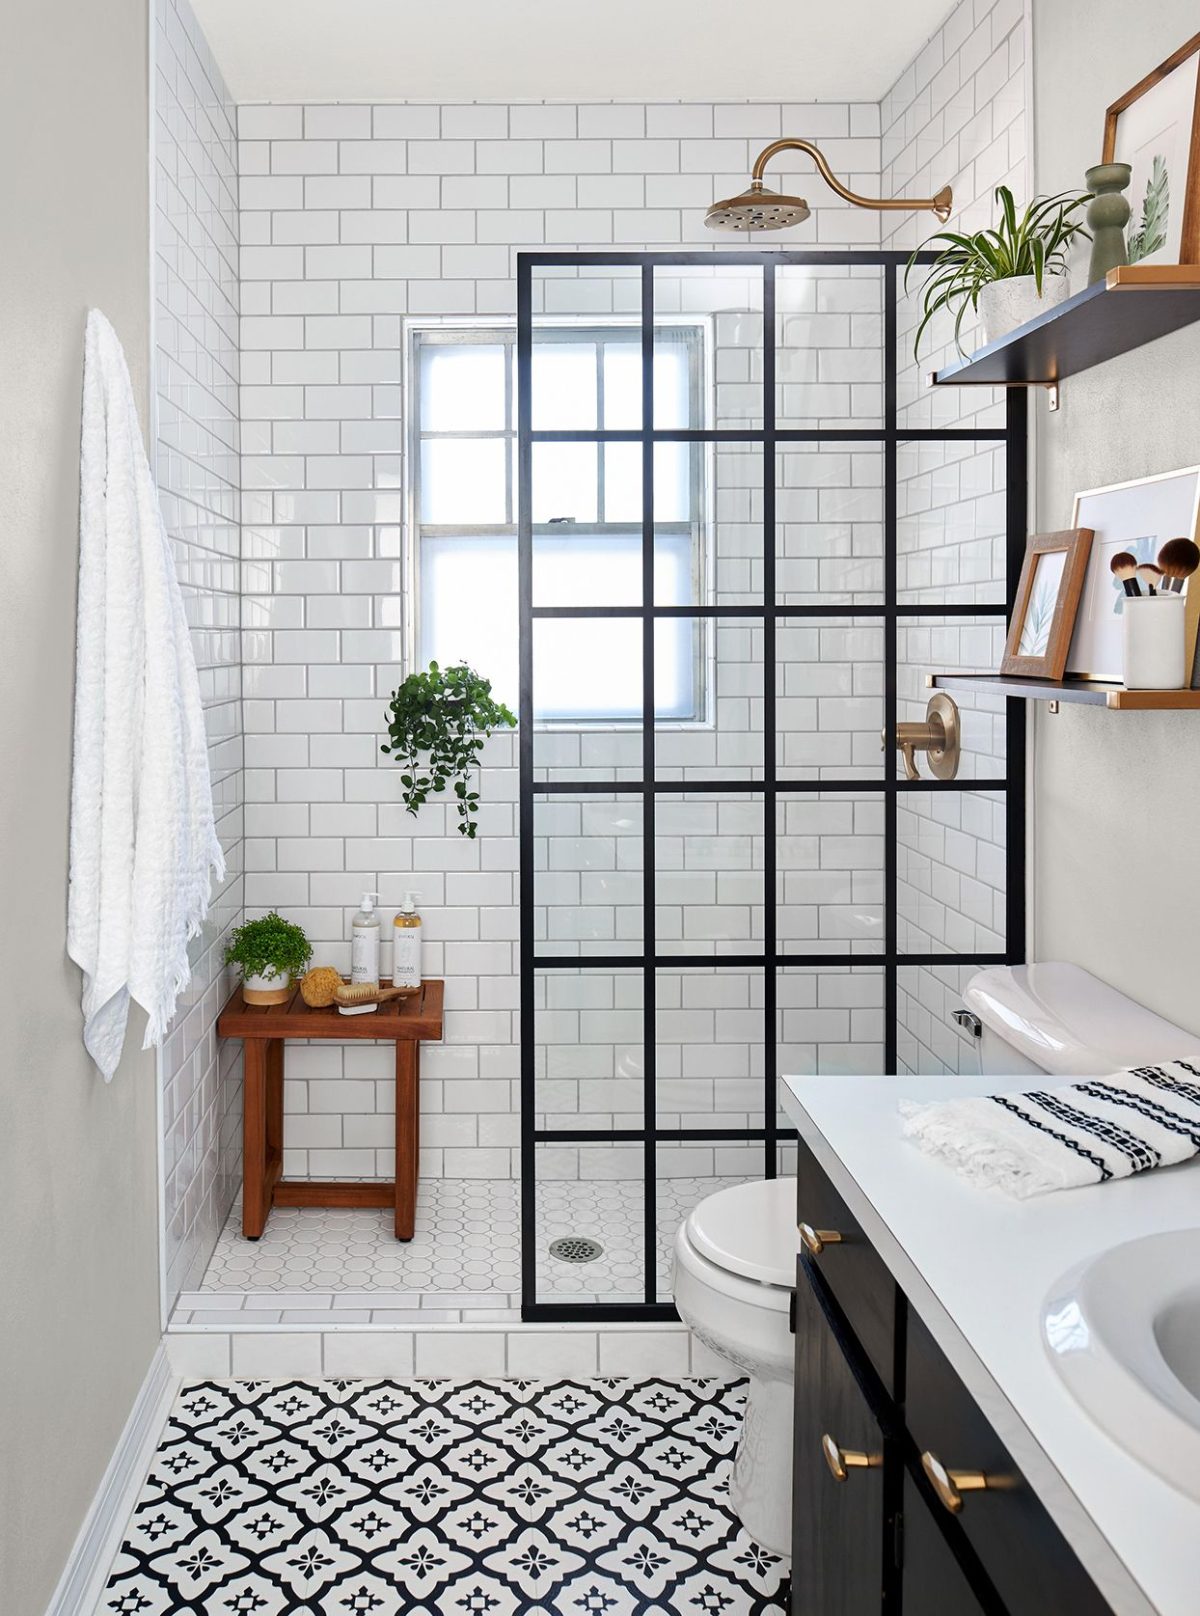 Top 10 Websites To Look For Bathtubs and Shower Bases